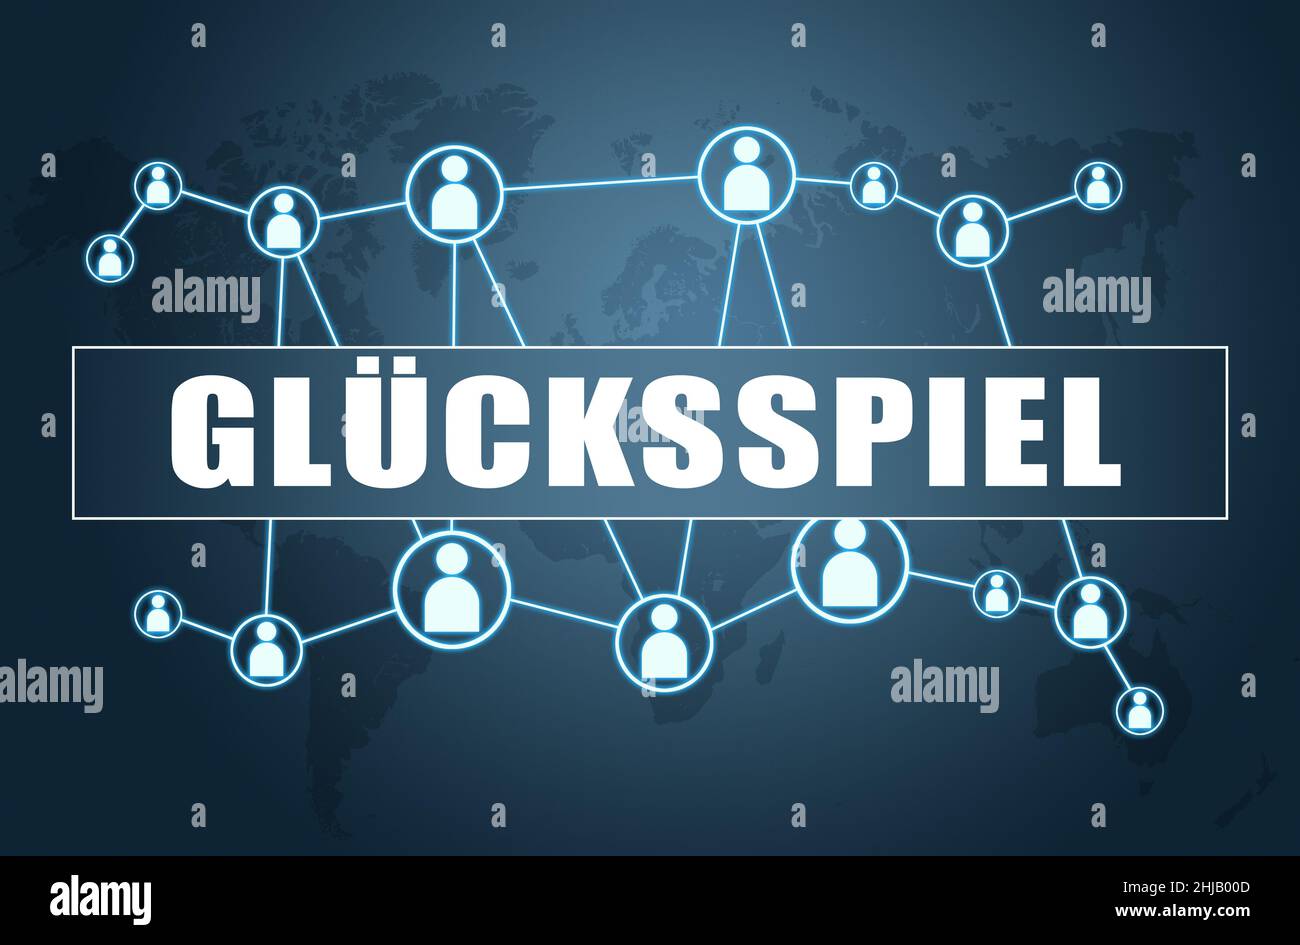 Gluecksspiel - german word for gambling or game of chance - text concept on blue background with world map and social icons. Stock Photo